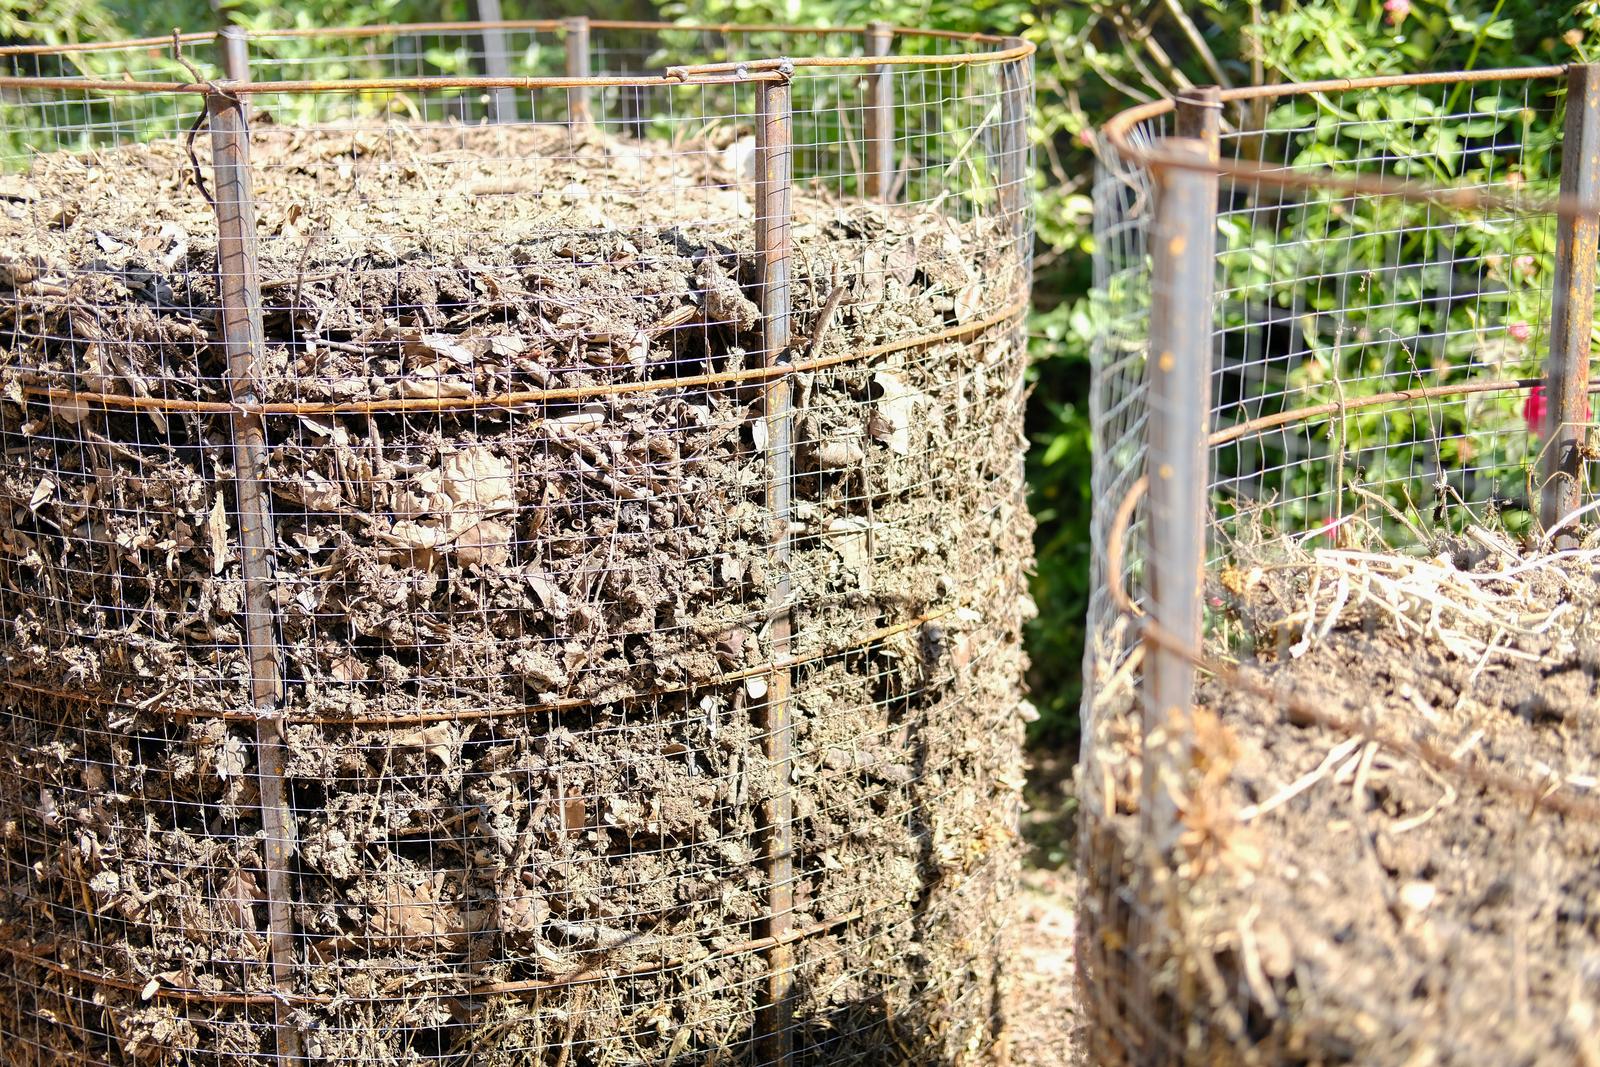 Easy Steps for Building Your Own Compost Bin